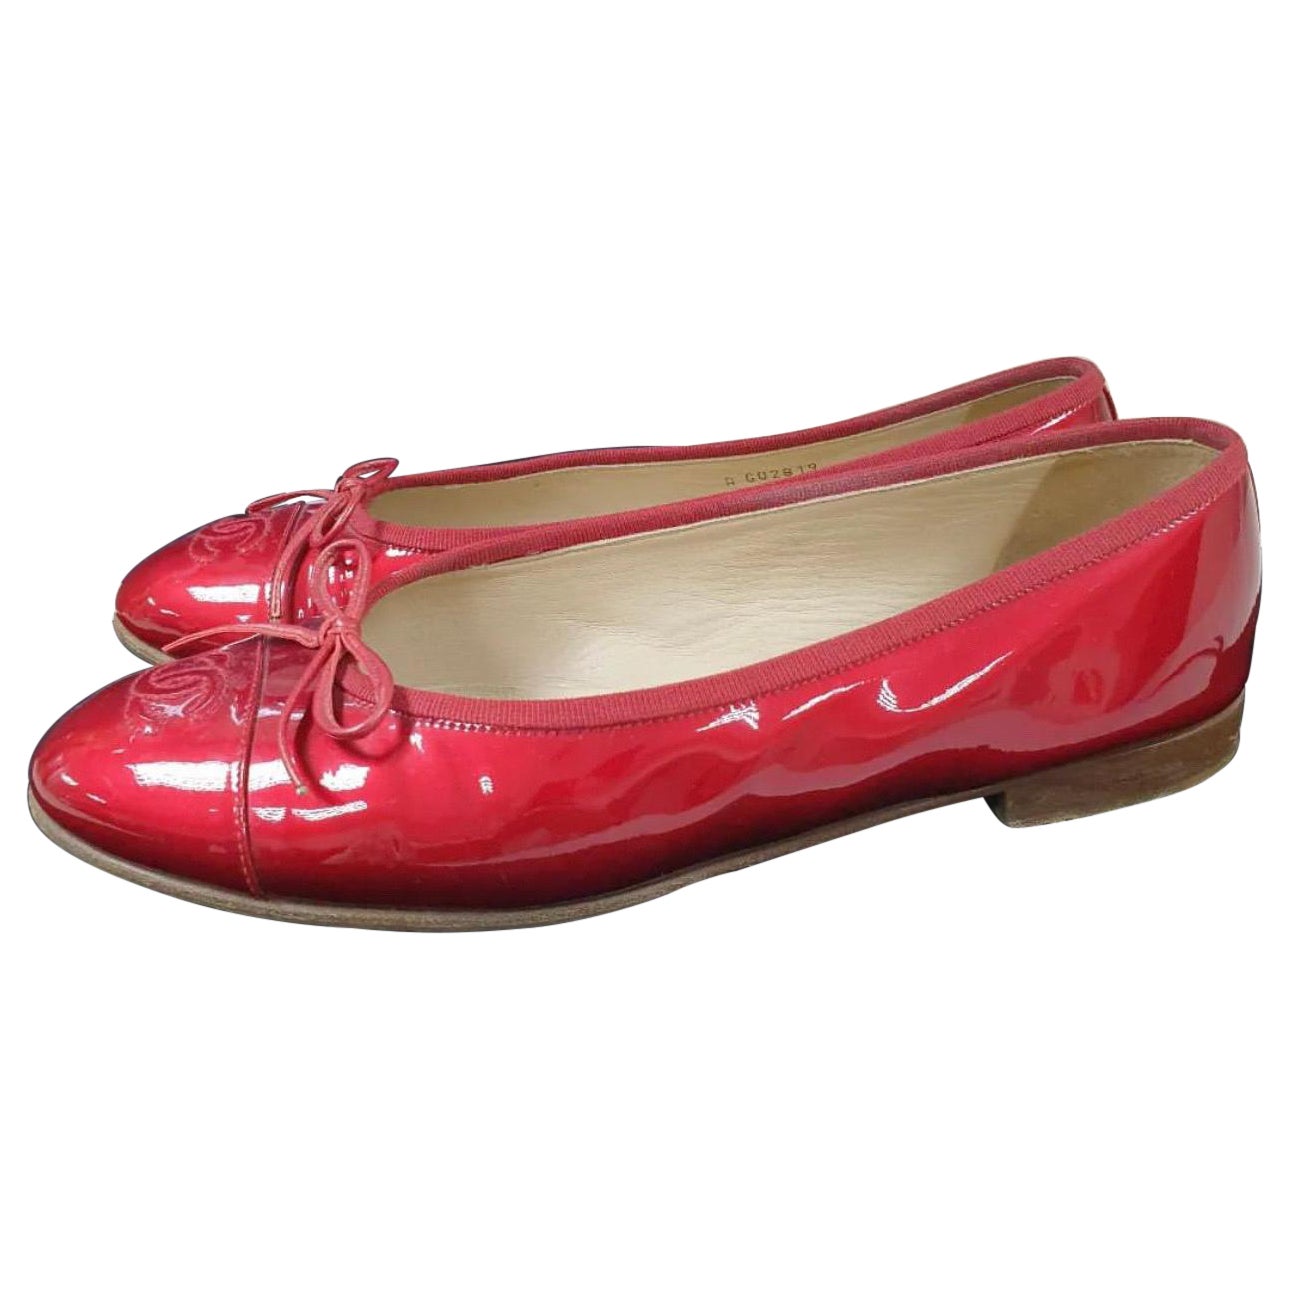 Patent leather ballet flats Chanel Red size 37.5 EU in Patent